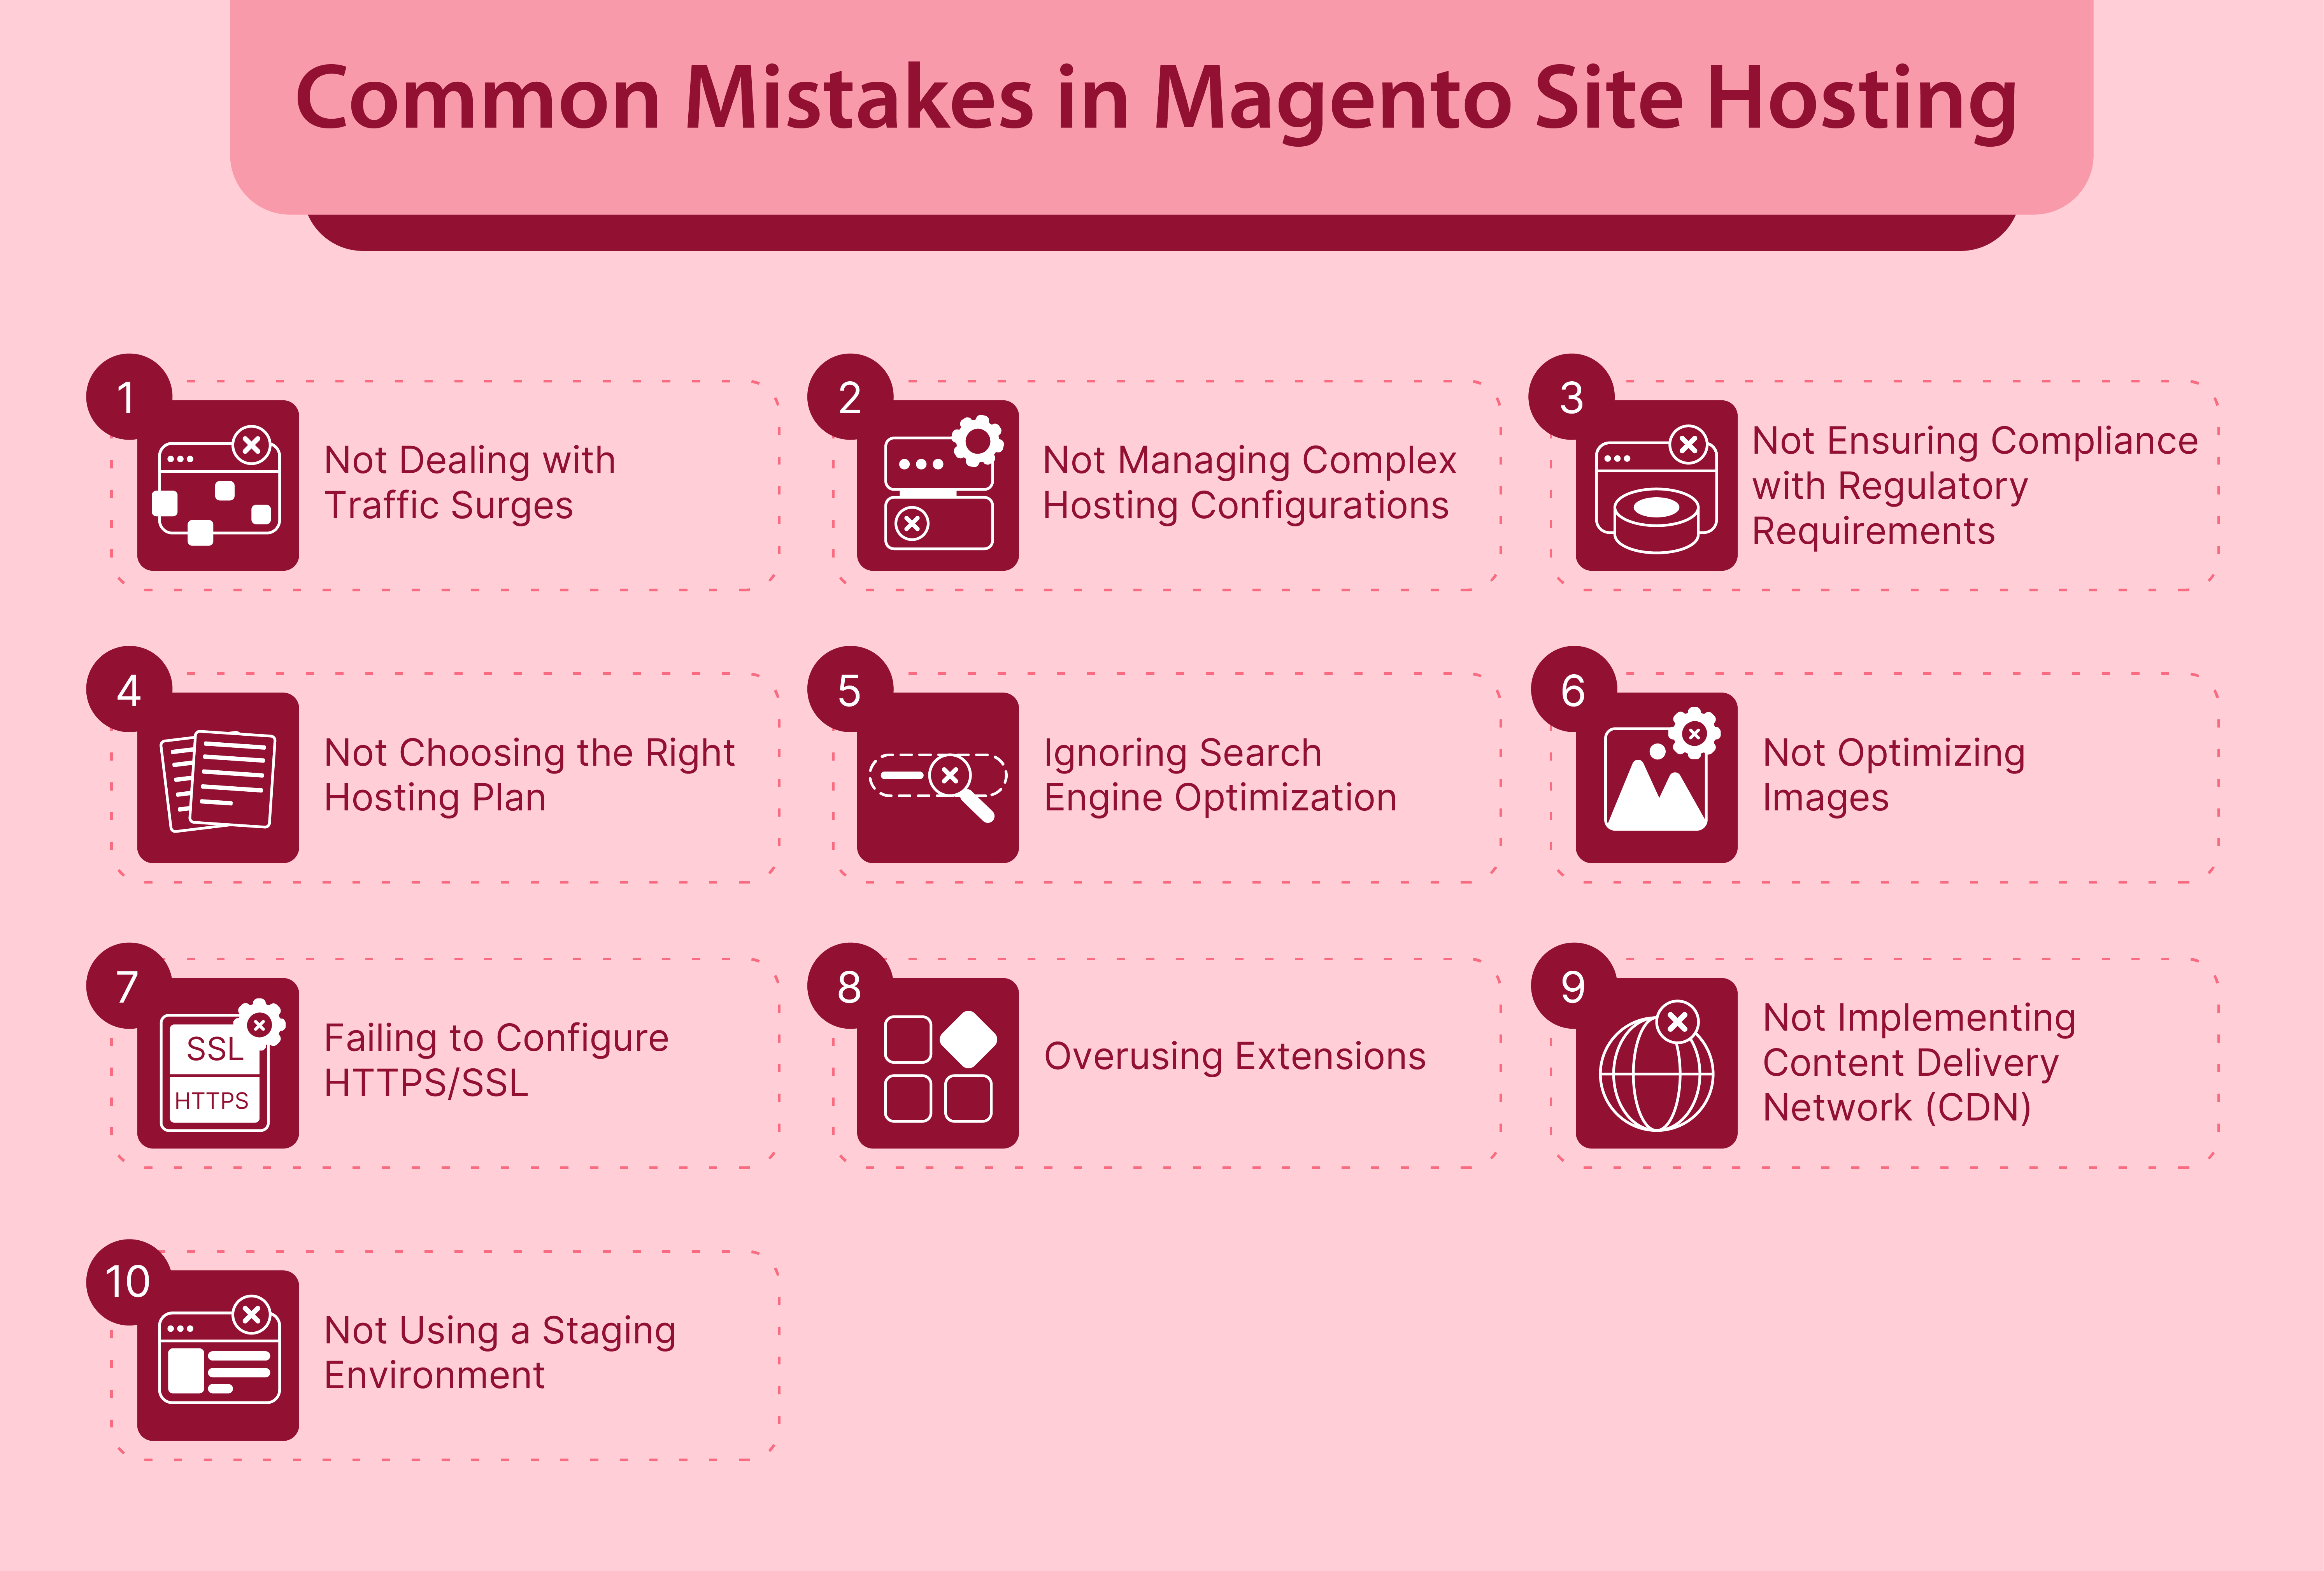 Common Mistakes in Magento Site Hosting